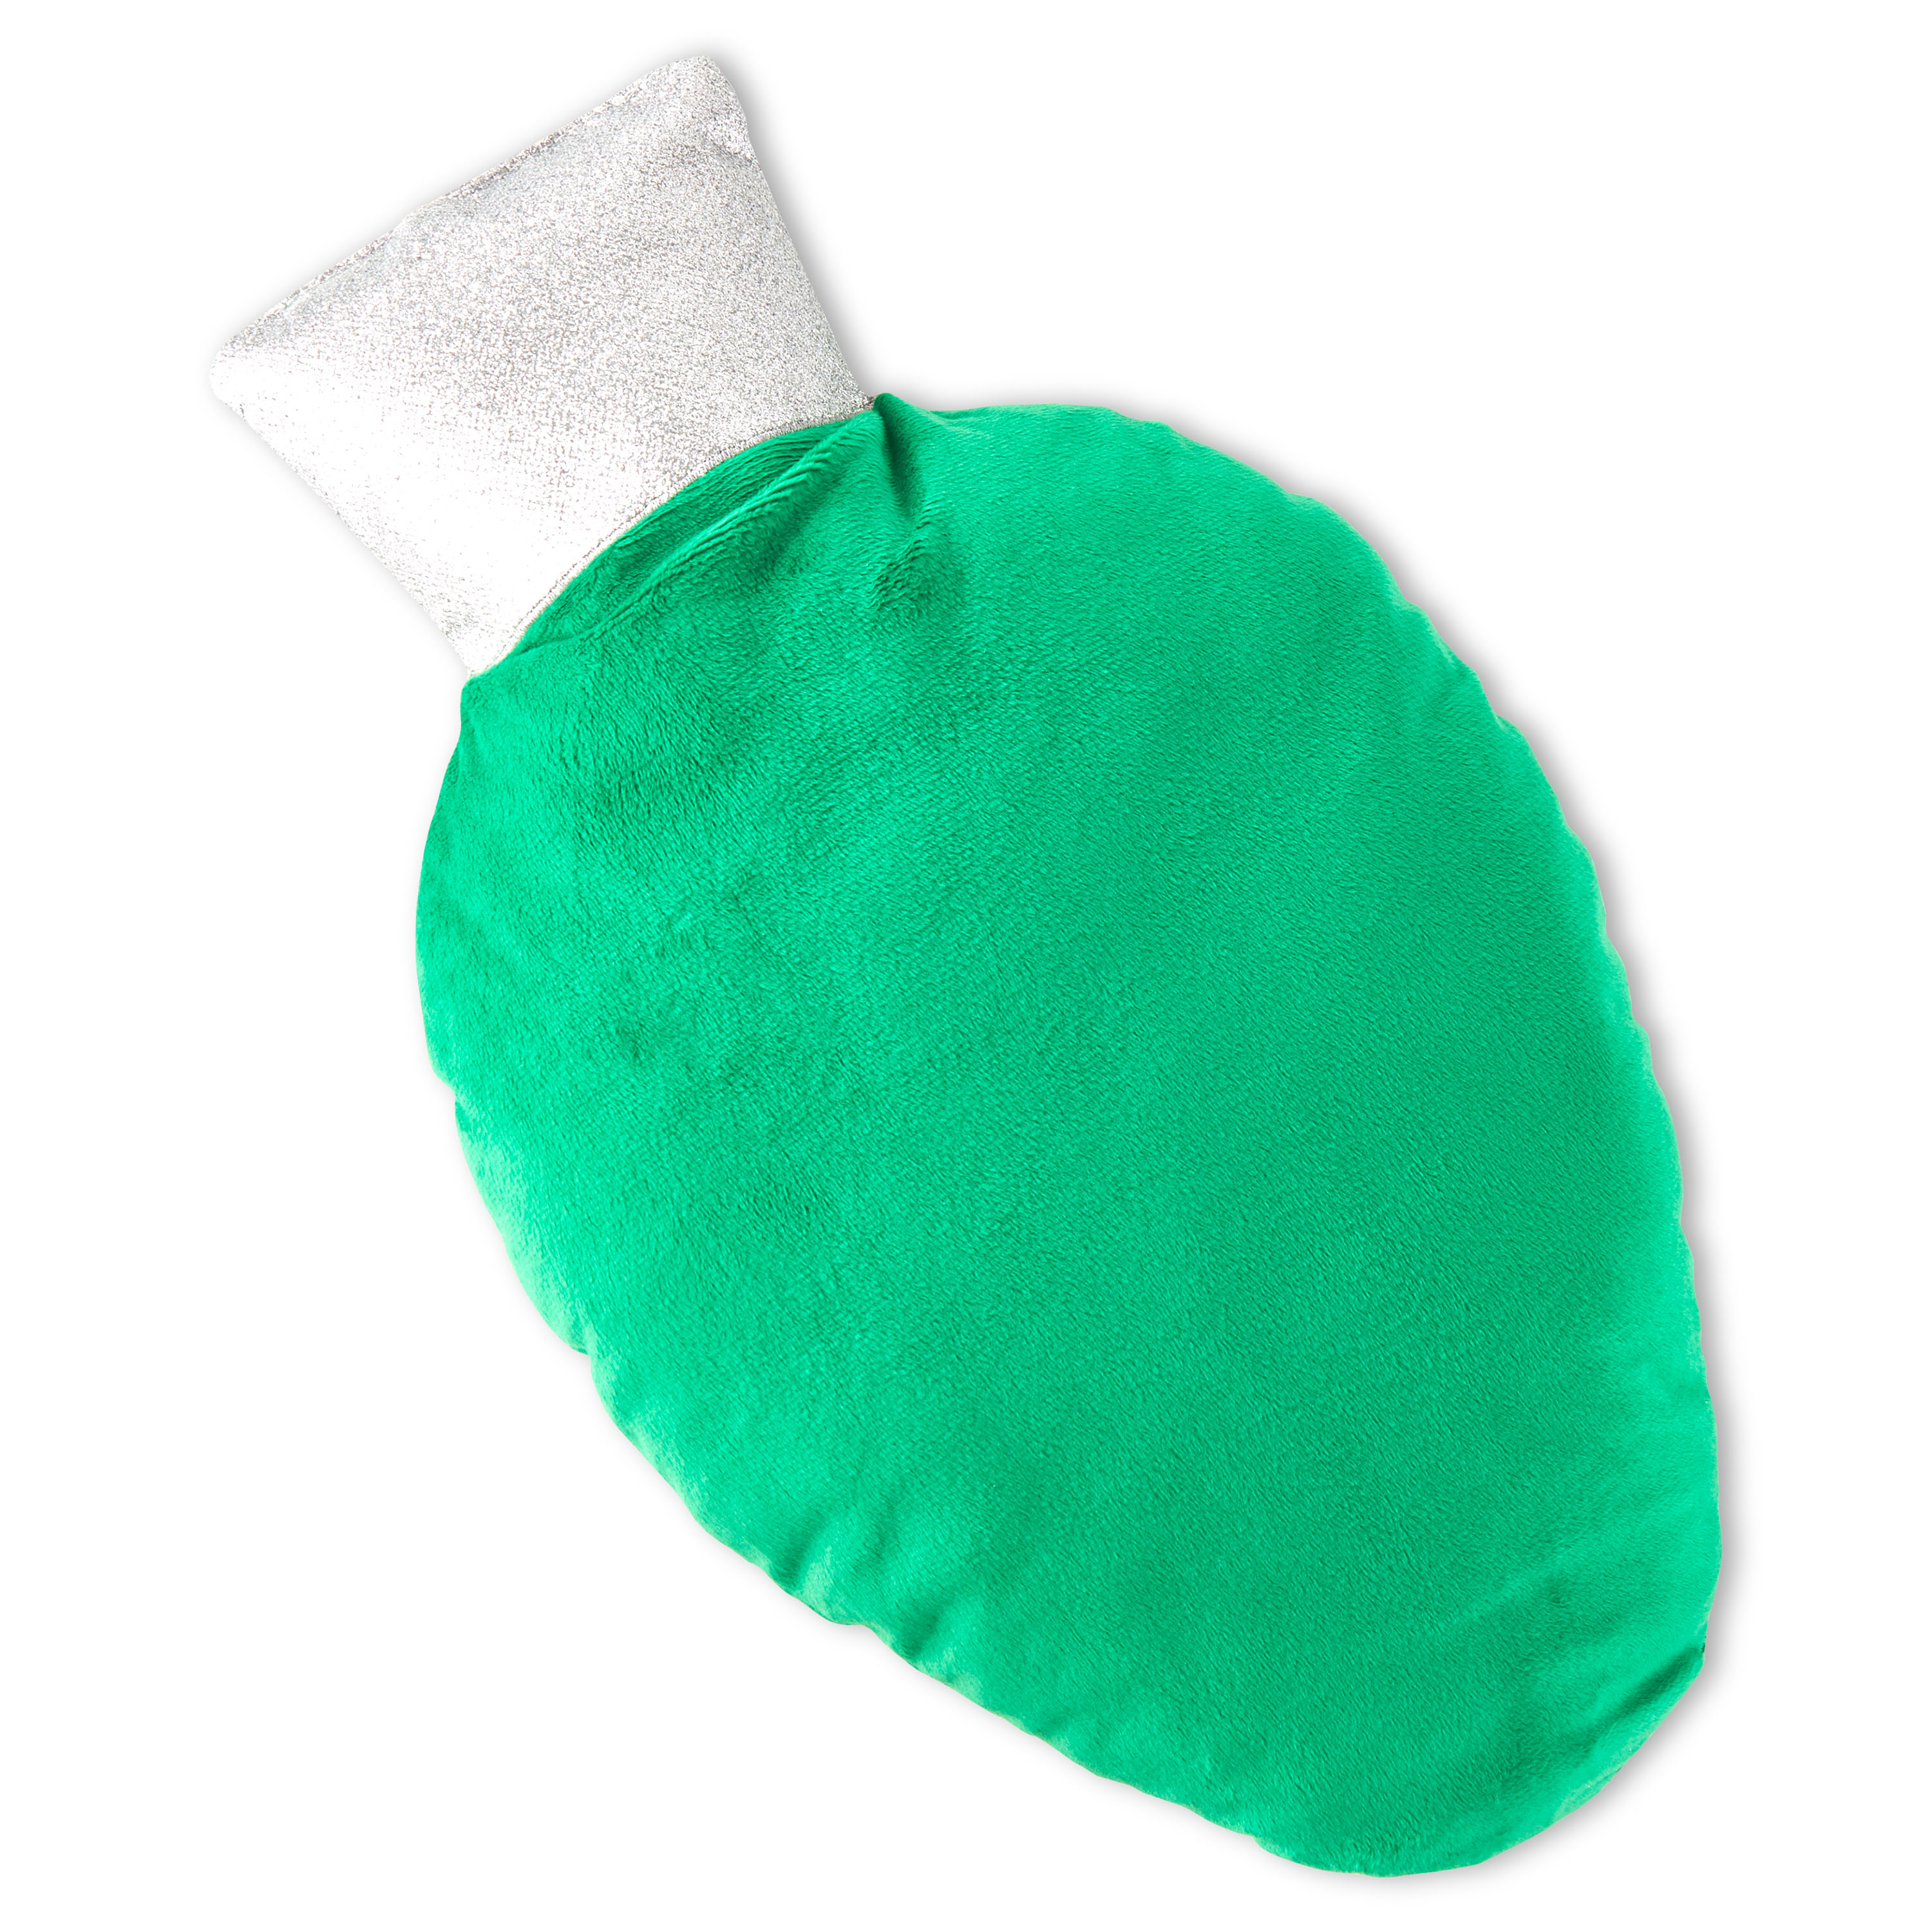 Holiday Time Christmas 15 inch Green C9 Bulb Decorative Pillows Plush, 2-pack - image 4 of 6